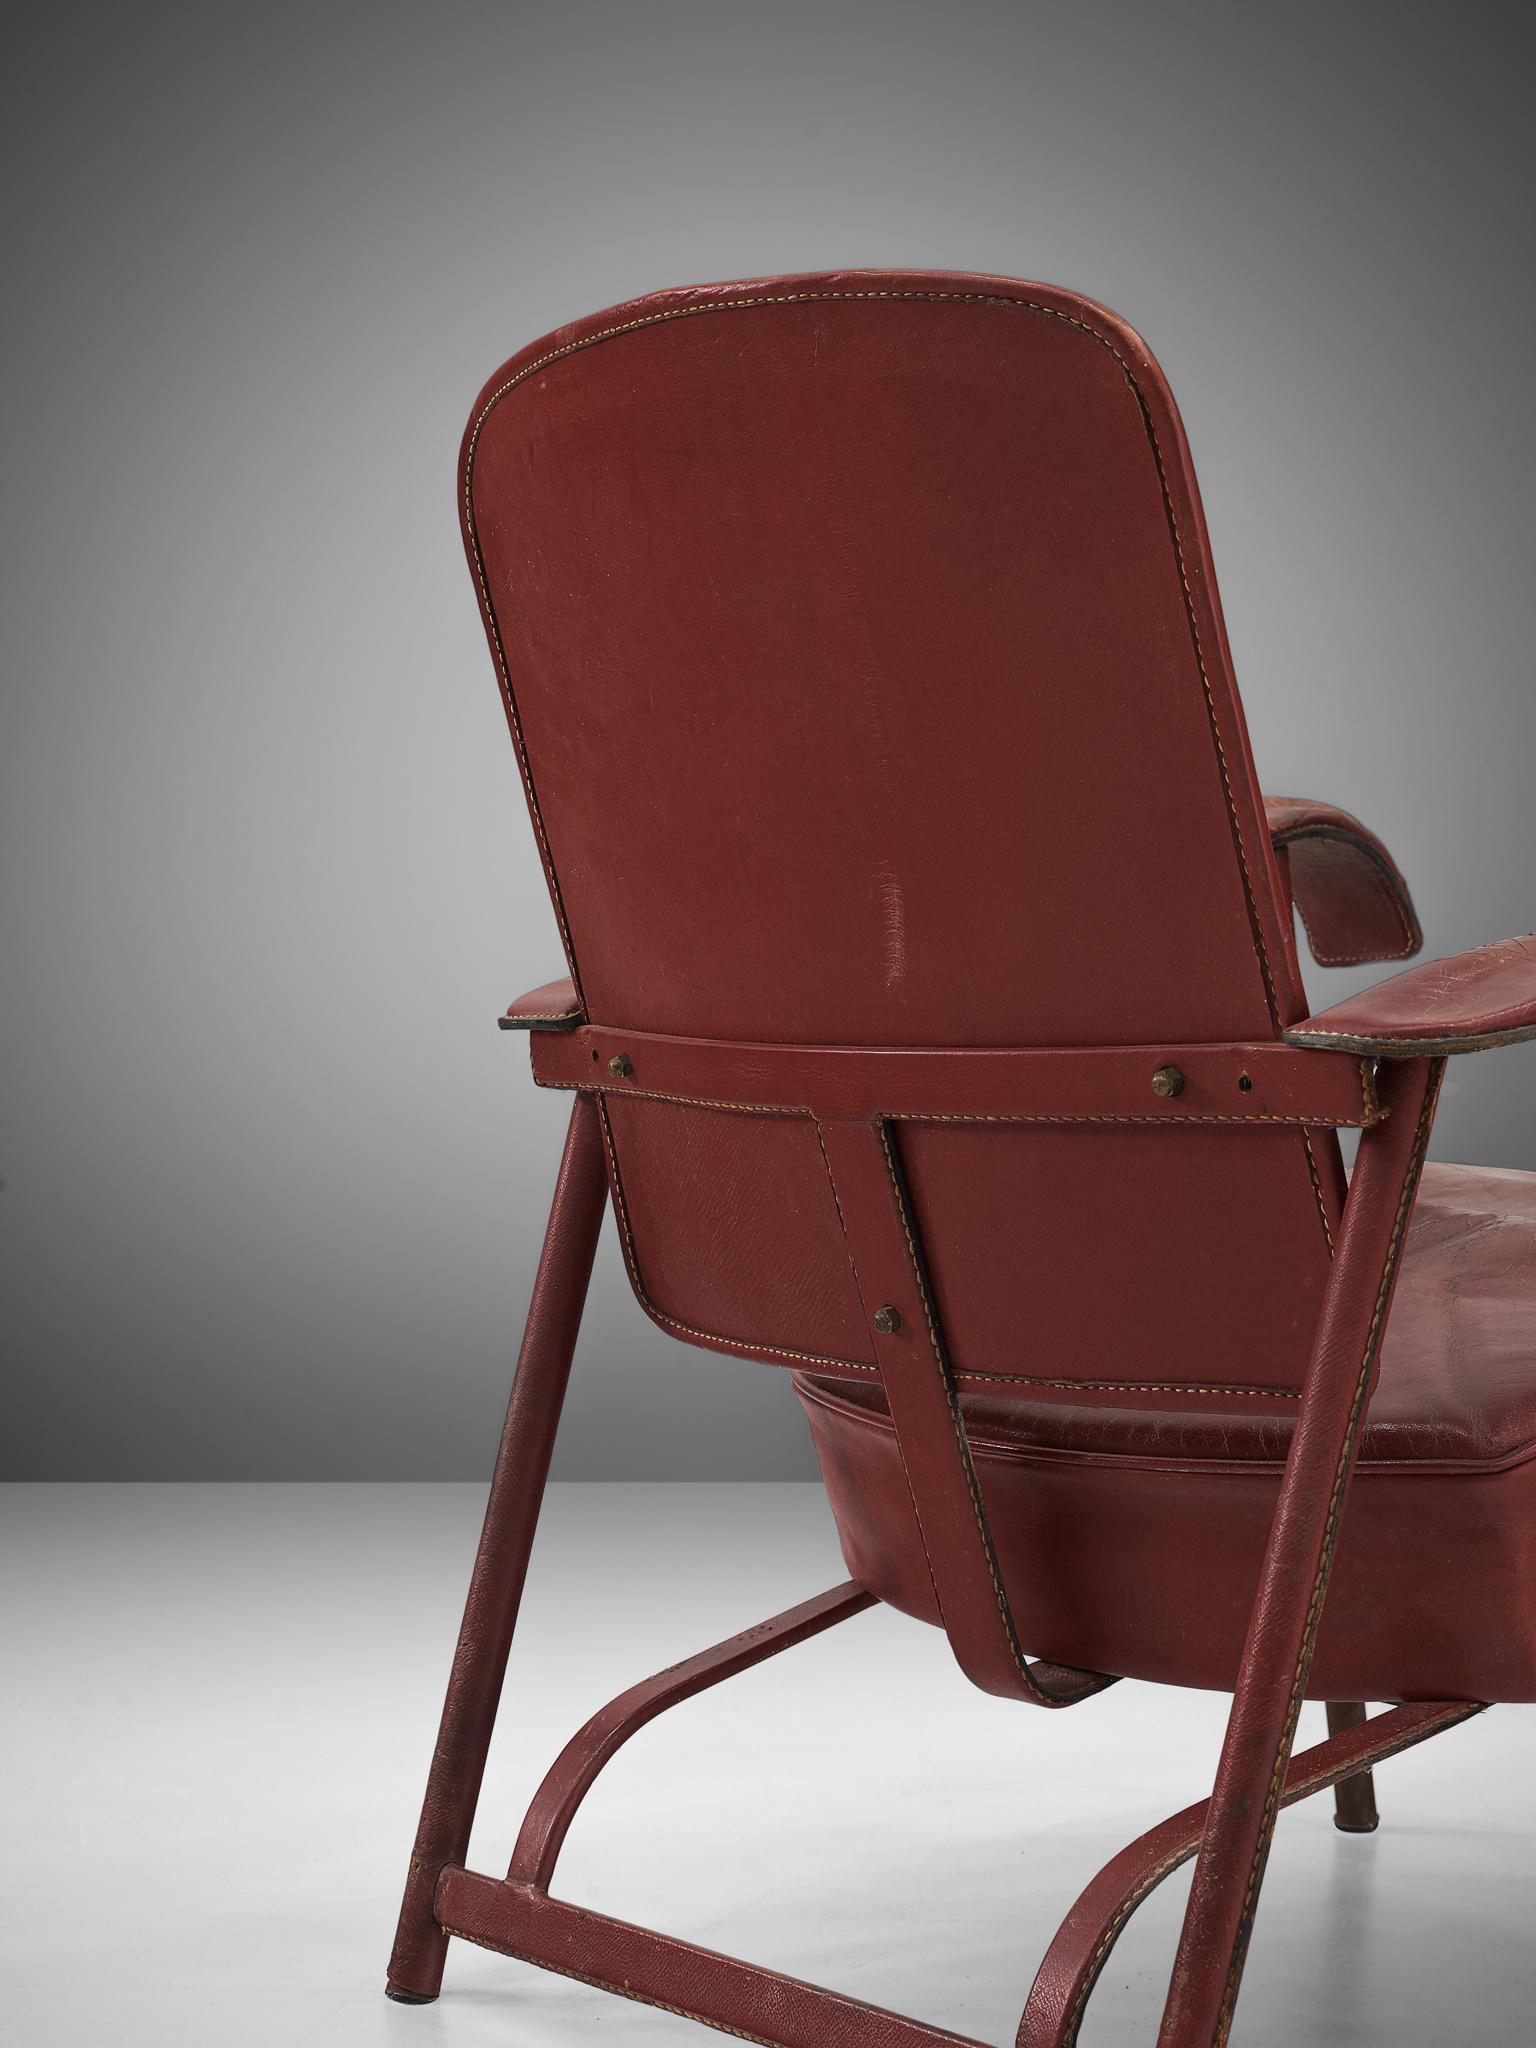 Mid-20th Century Pair of Lounge Chairs in Patinated Burgundy Leather by Jacques Adnet